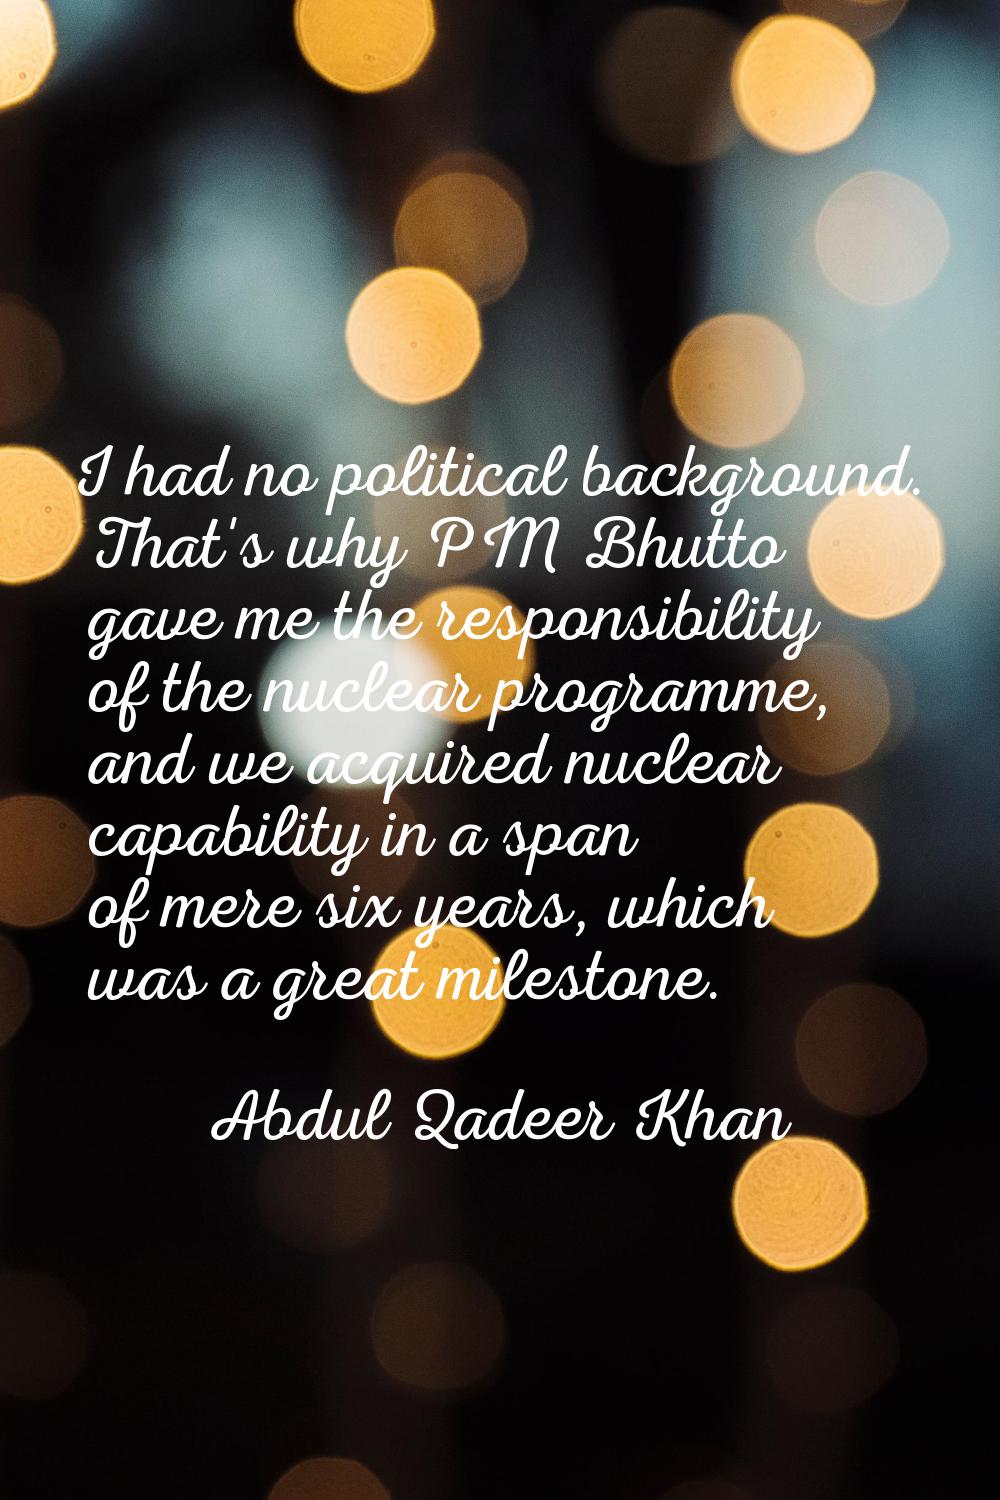 I had no political background. That's why PM Bhutto gave me the responsibility of the nuclear progr